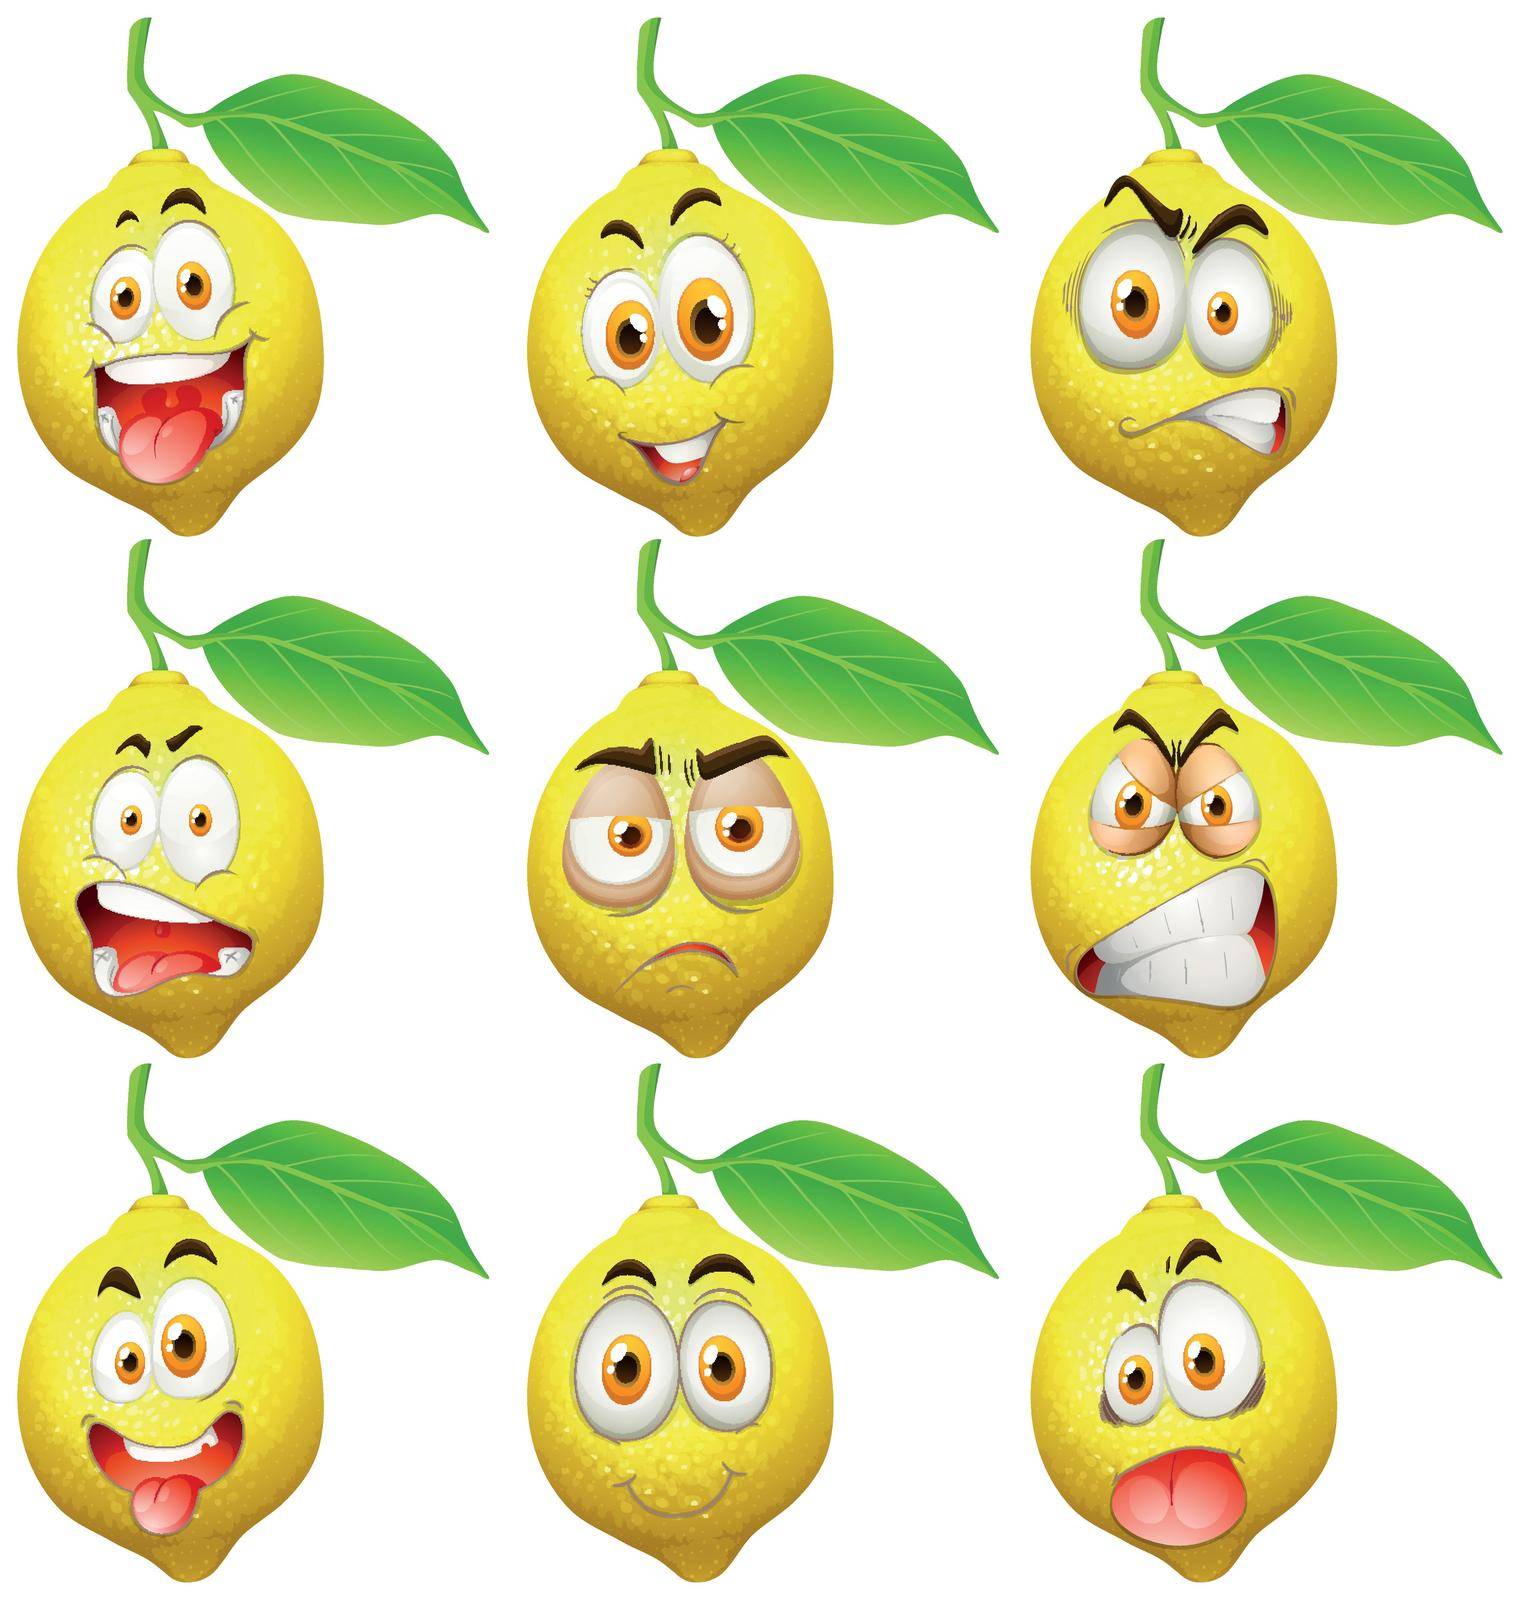 Fresh lemon with facial expressions illustration